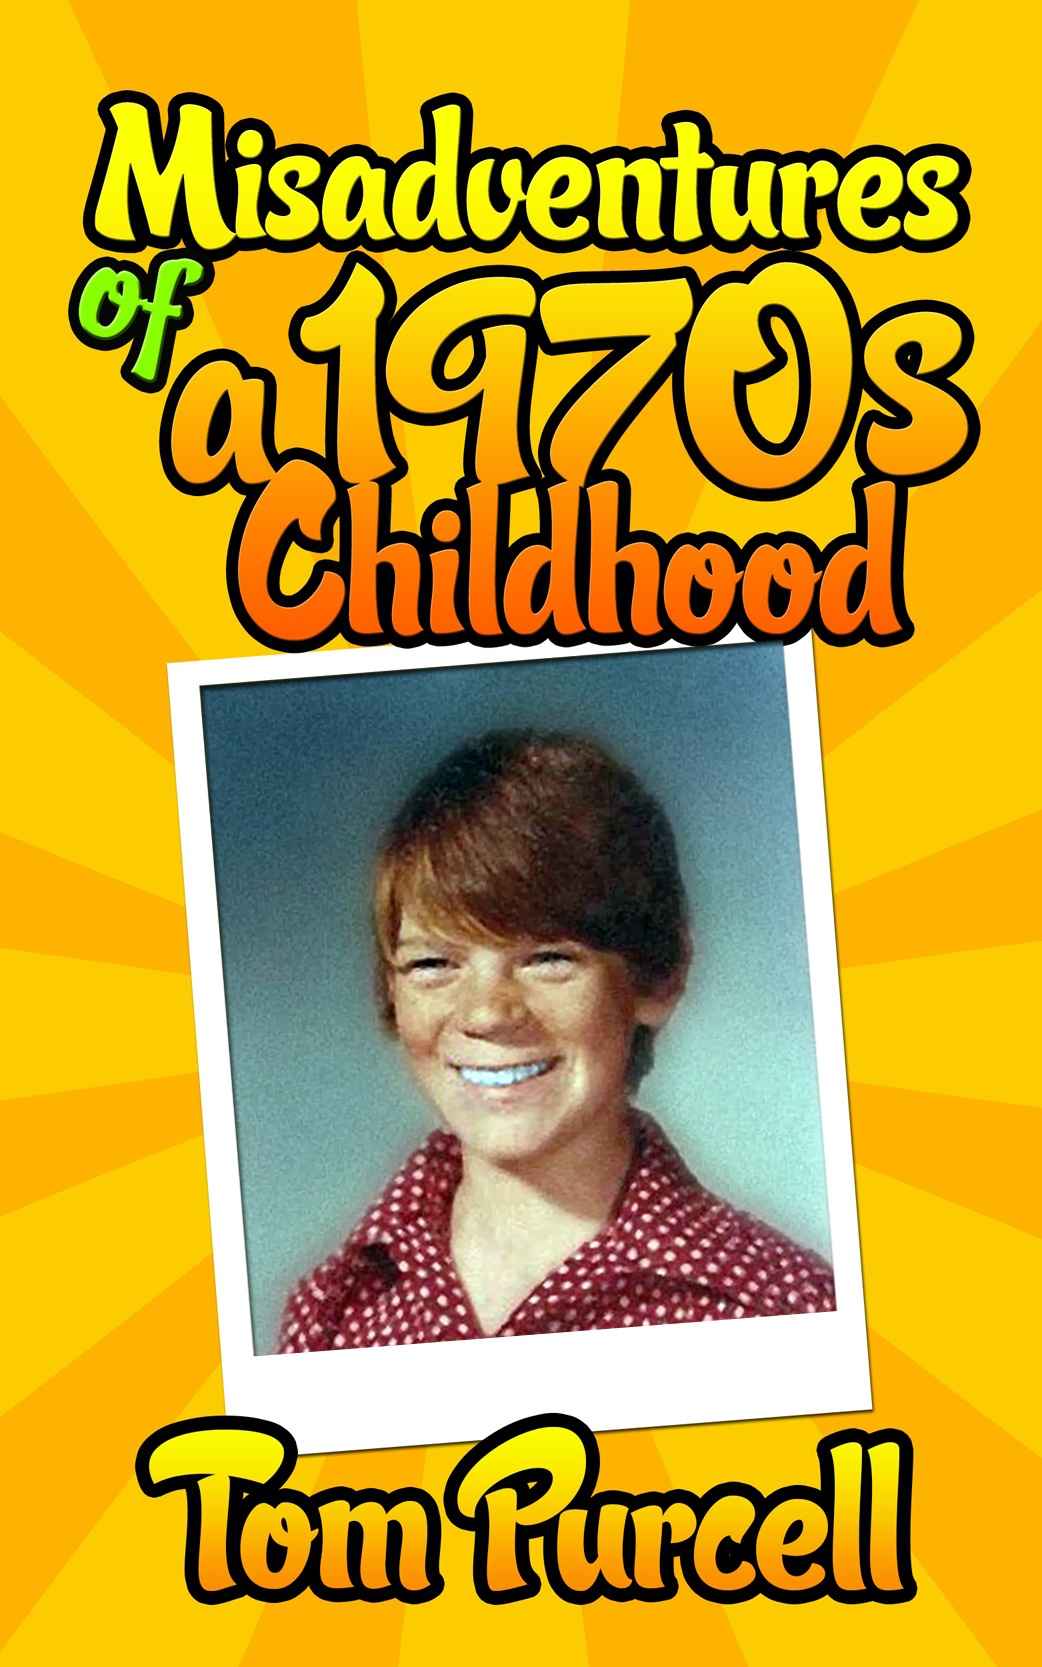 FREE: Misadventures of a 1970s Childhood: A Humorous Memoir by Tom Purcell